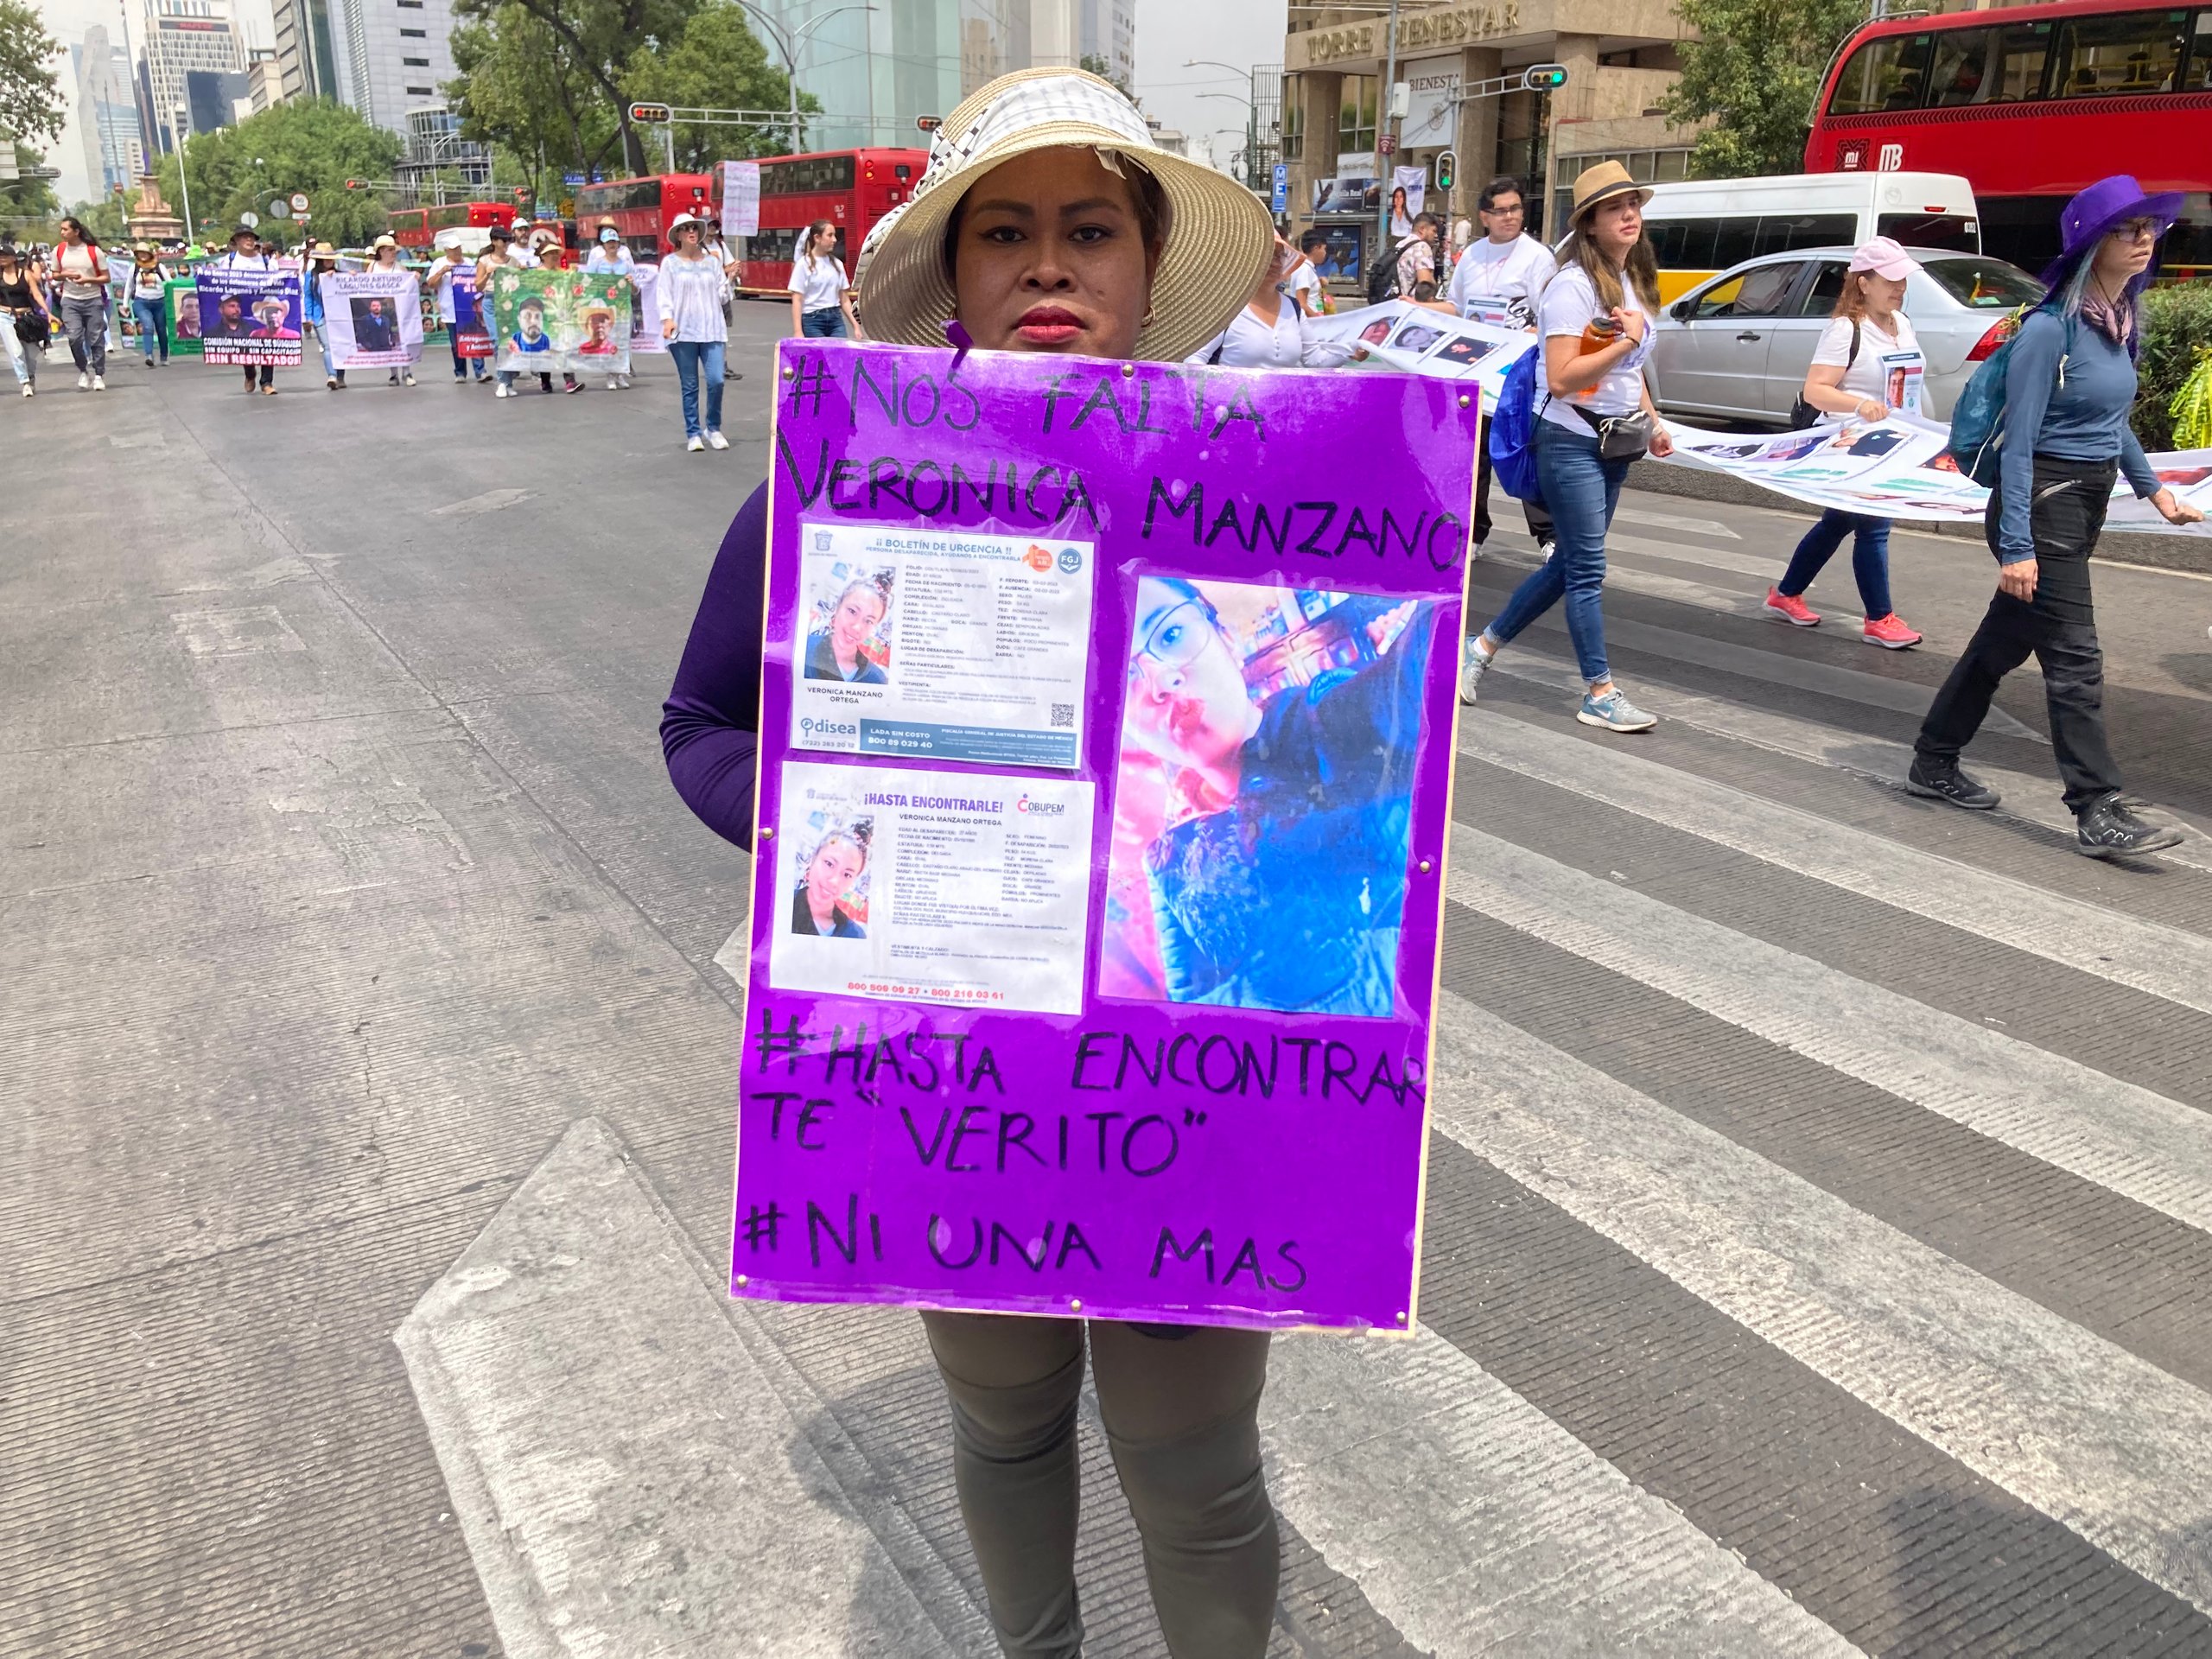 A woman holds up a purple sign during a protest in Mexico City for her disappeared family member.